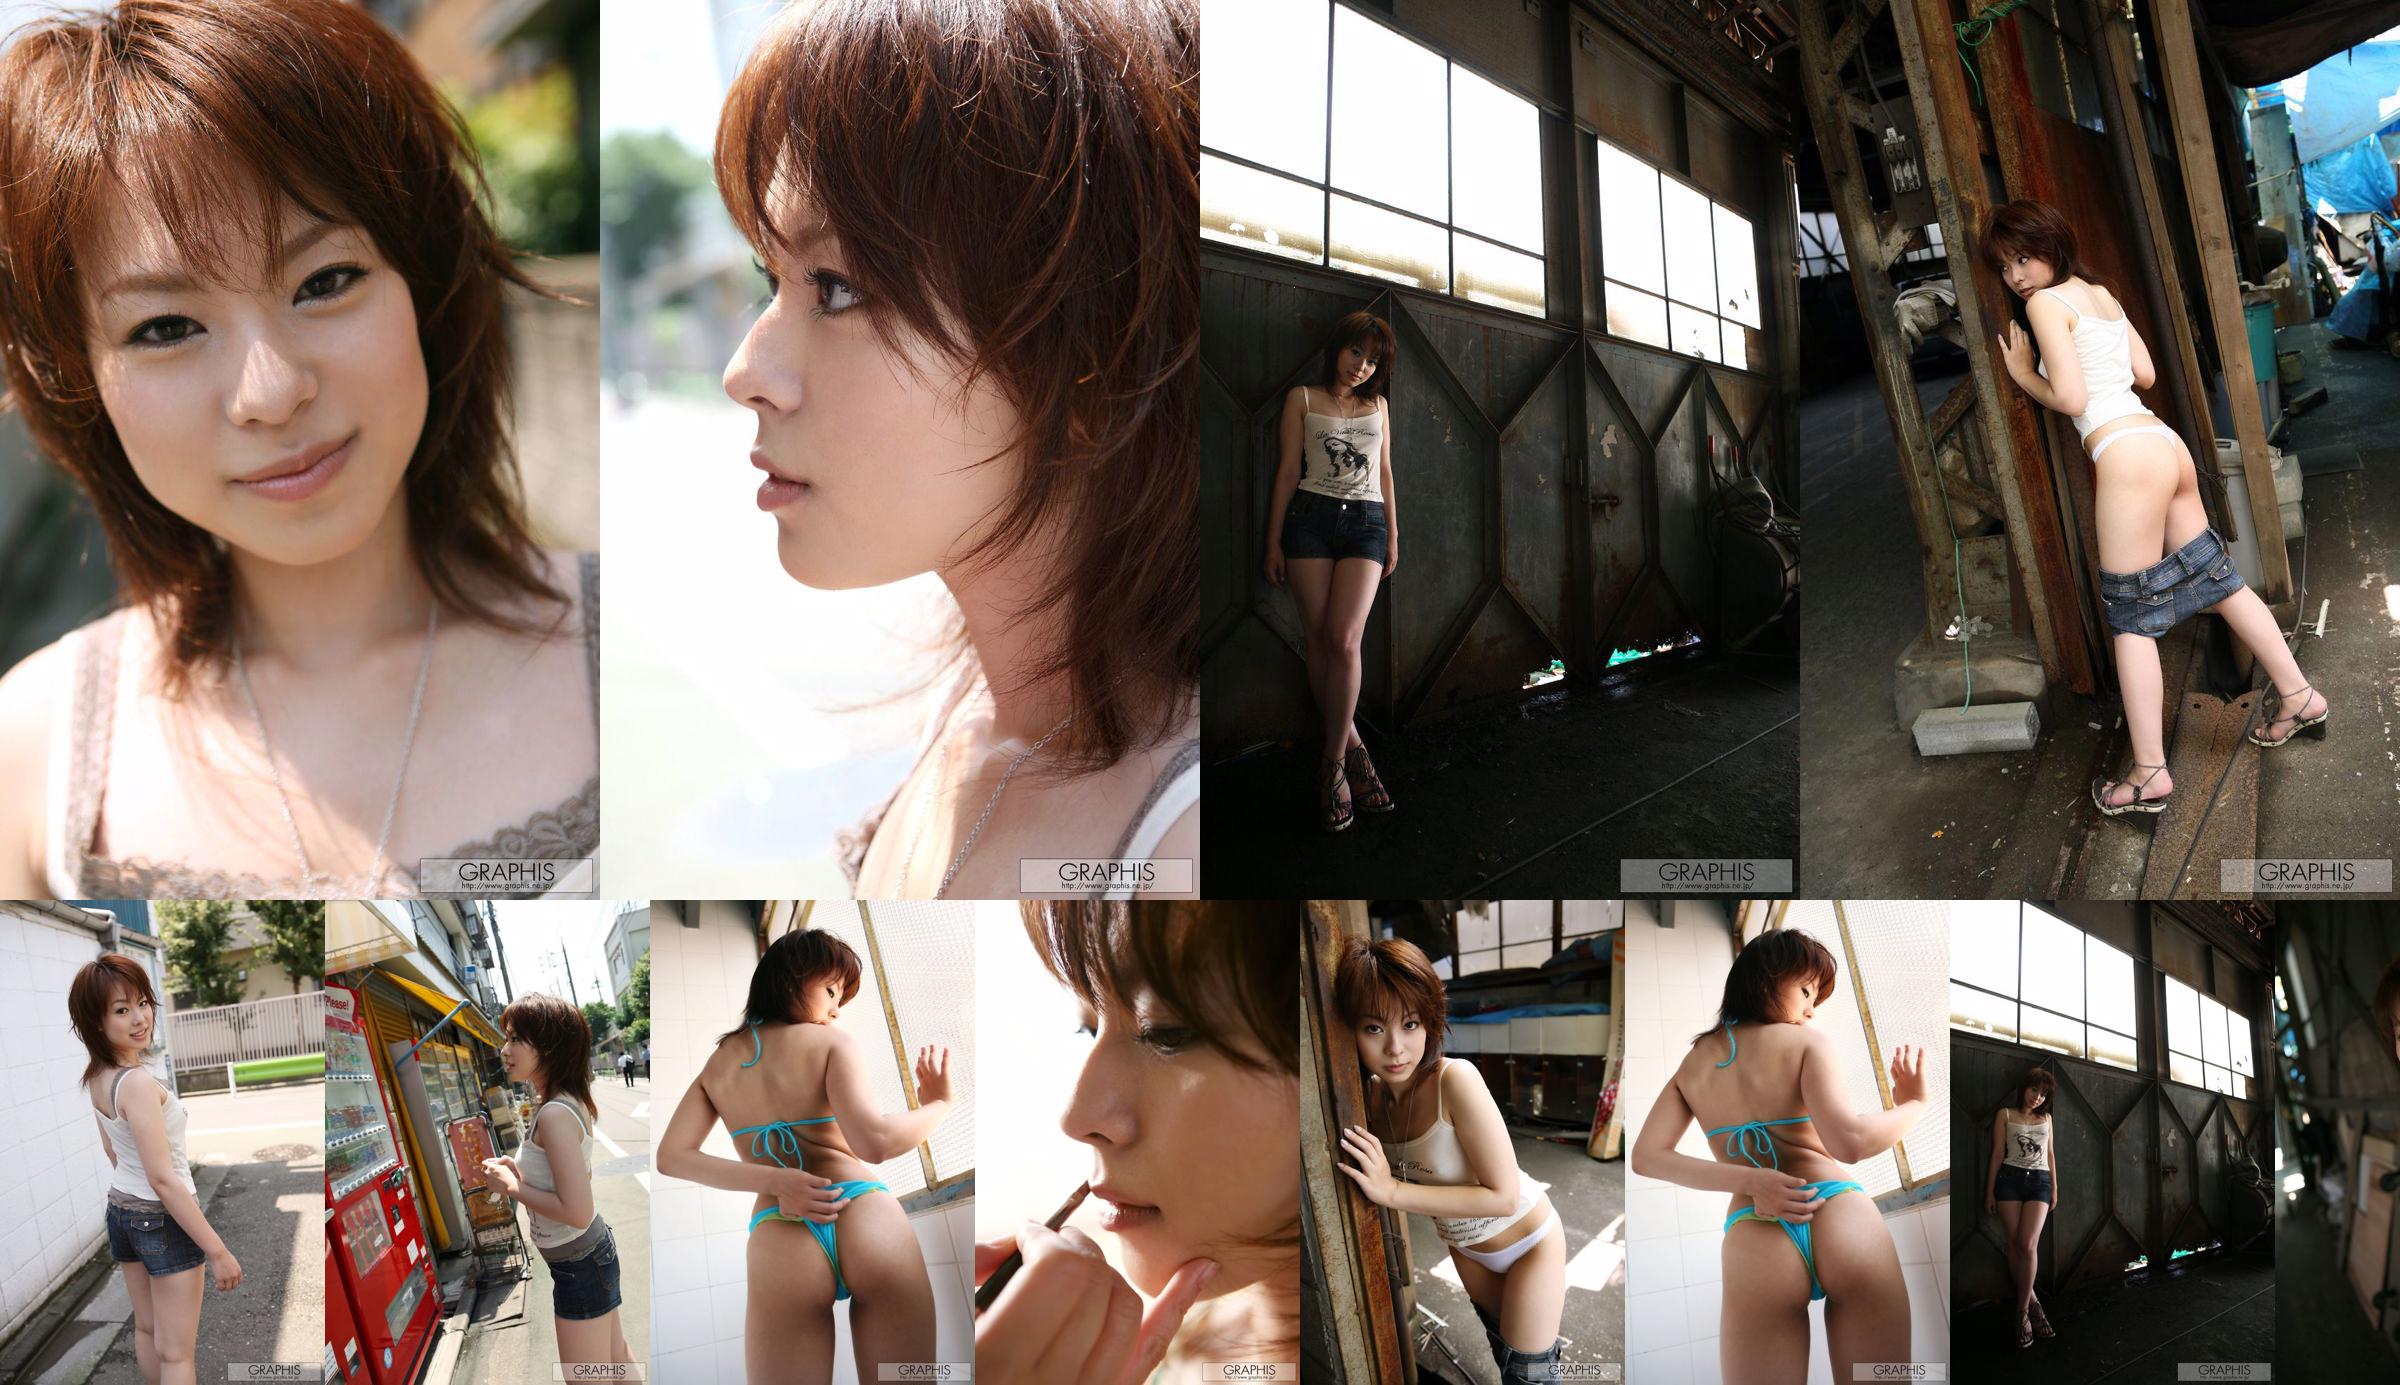 Mina Manabe Mina Manabe [Graphis] First Gravure First Take Off Daughter No.8cea2f Page 3